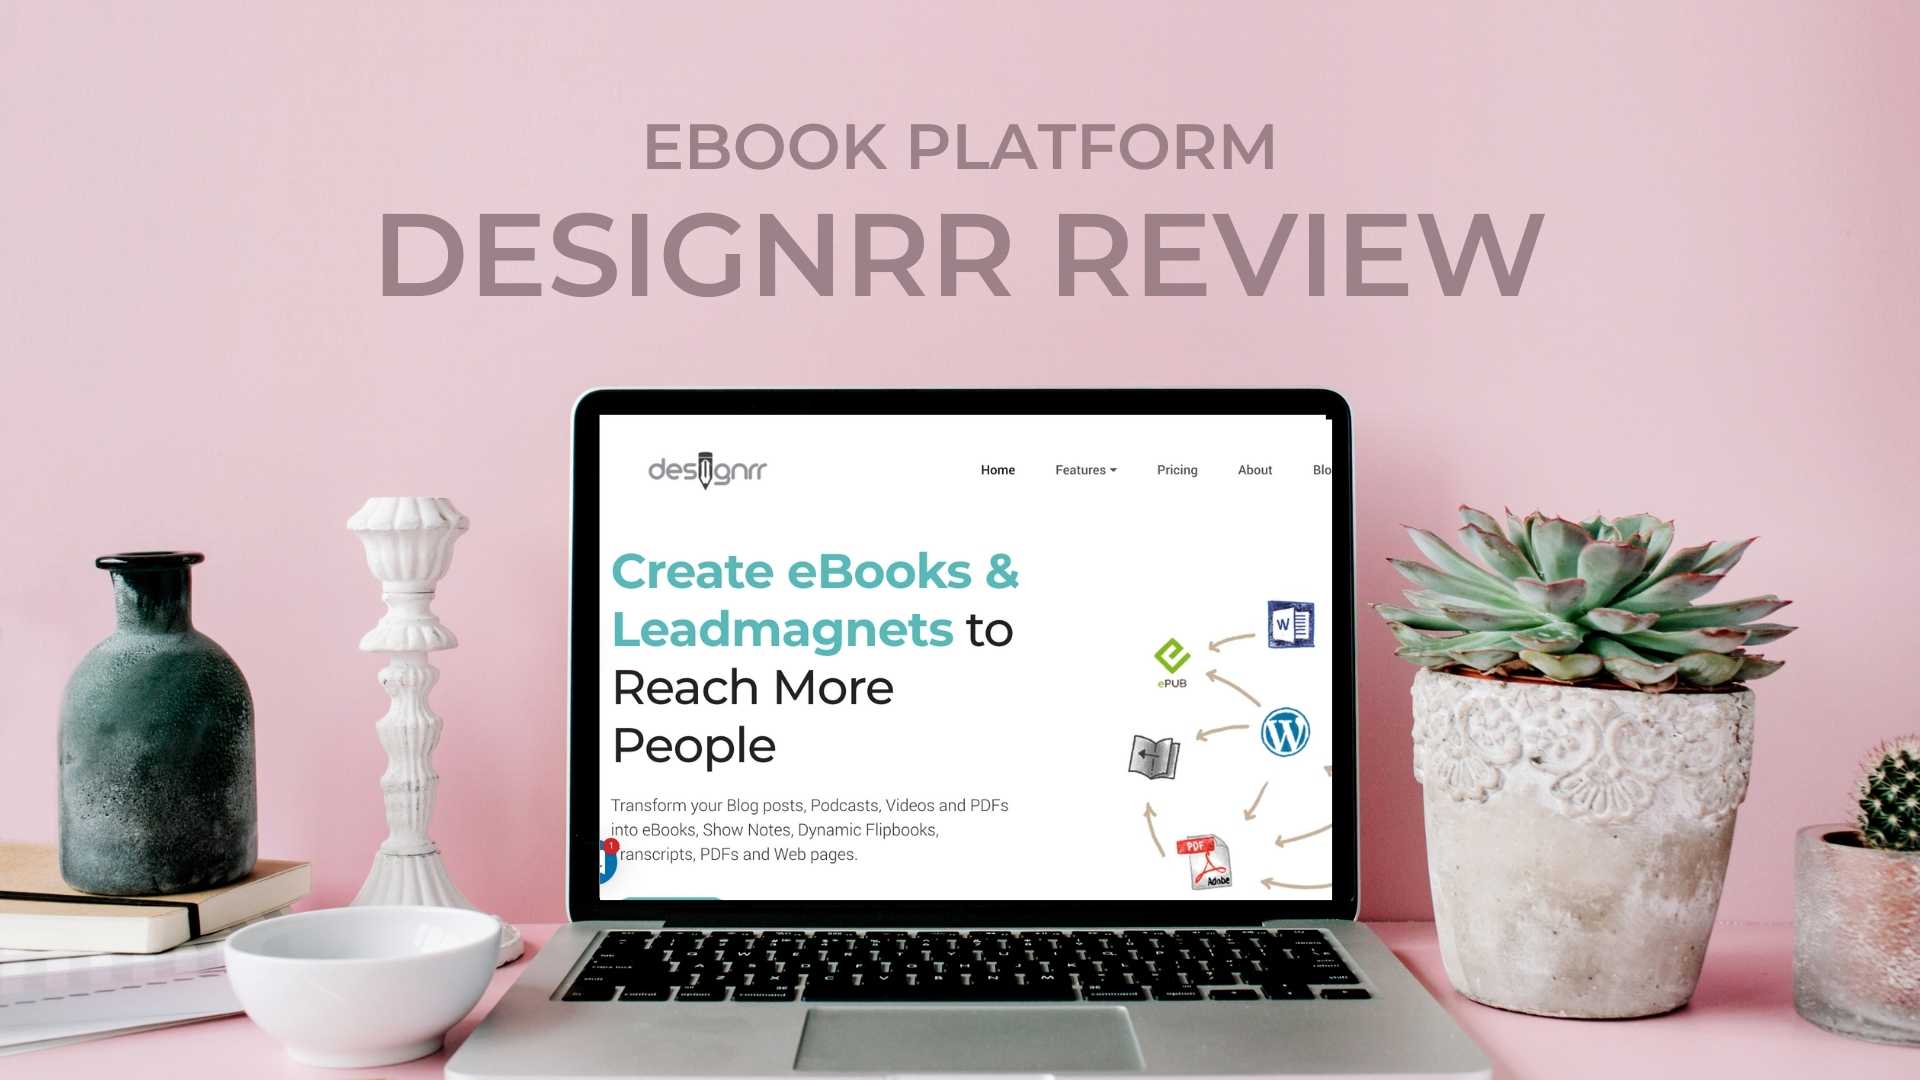 Designrr helps content marketers create ebooks in minutes